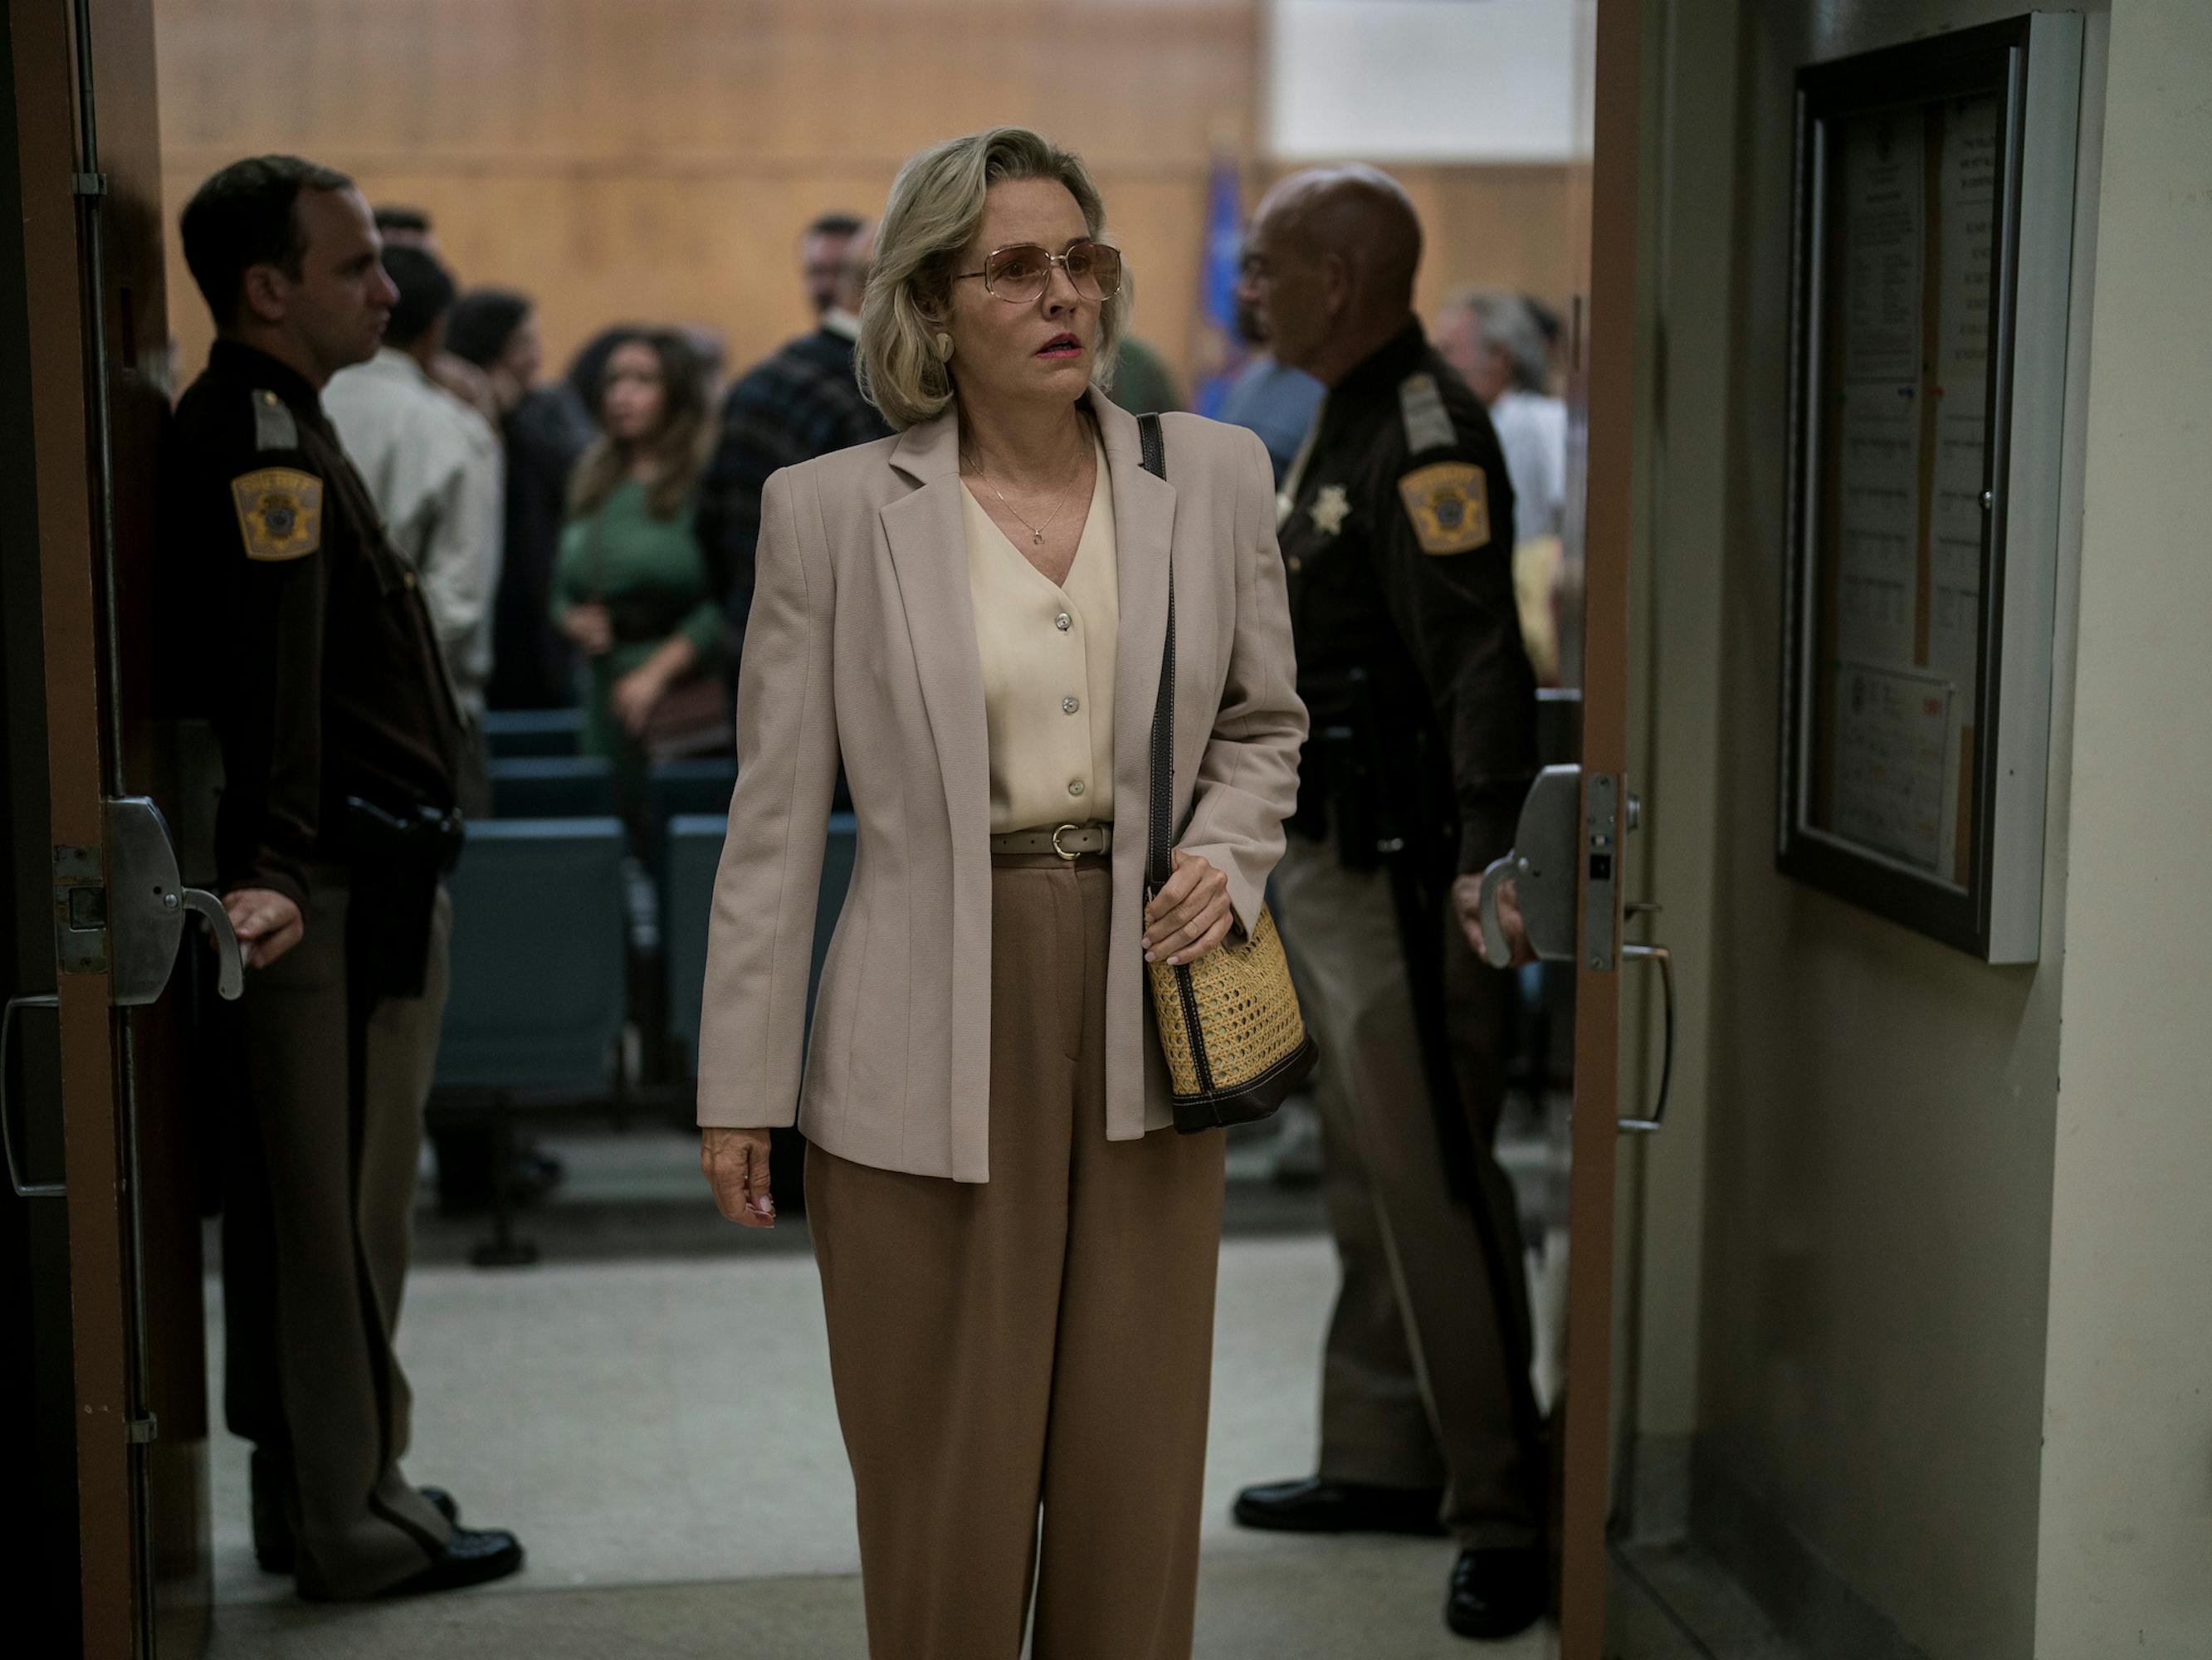 Joyce (Penelope Ann Miller) wears brown pants and a blazer and leaves a courtroom.